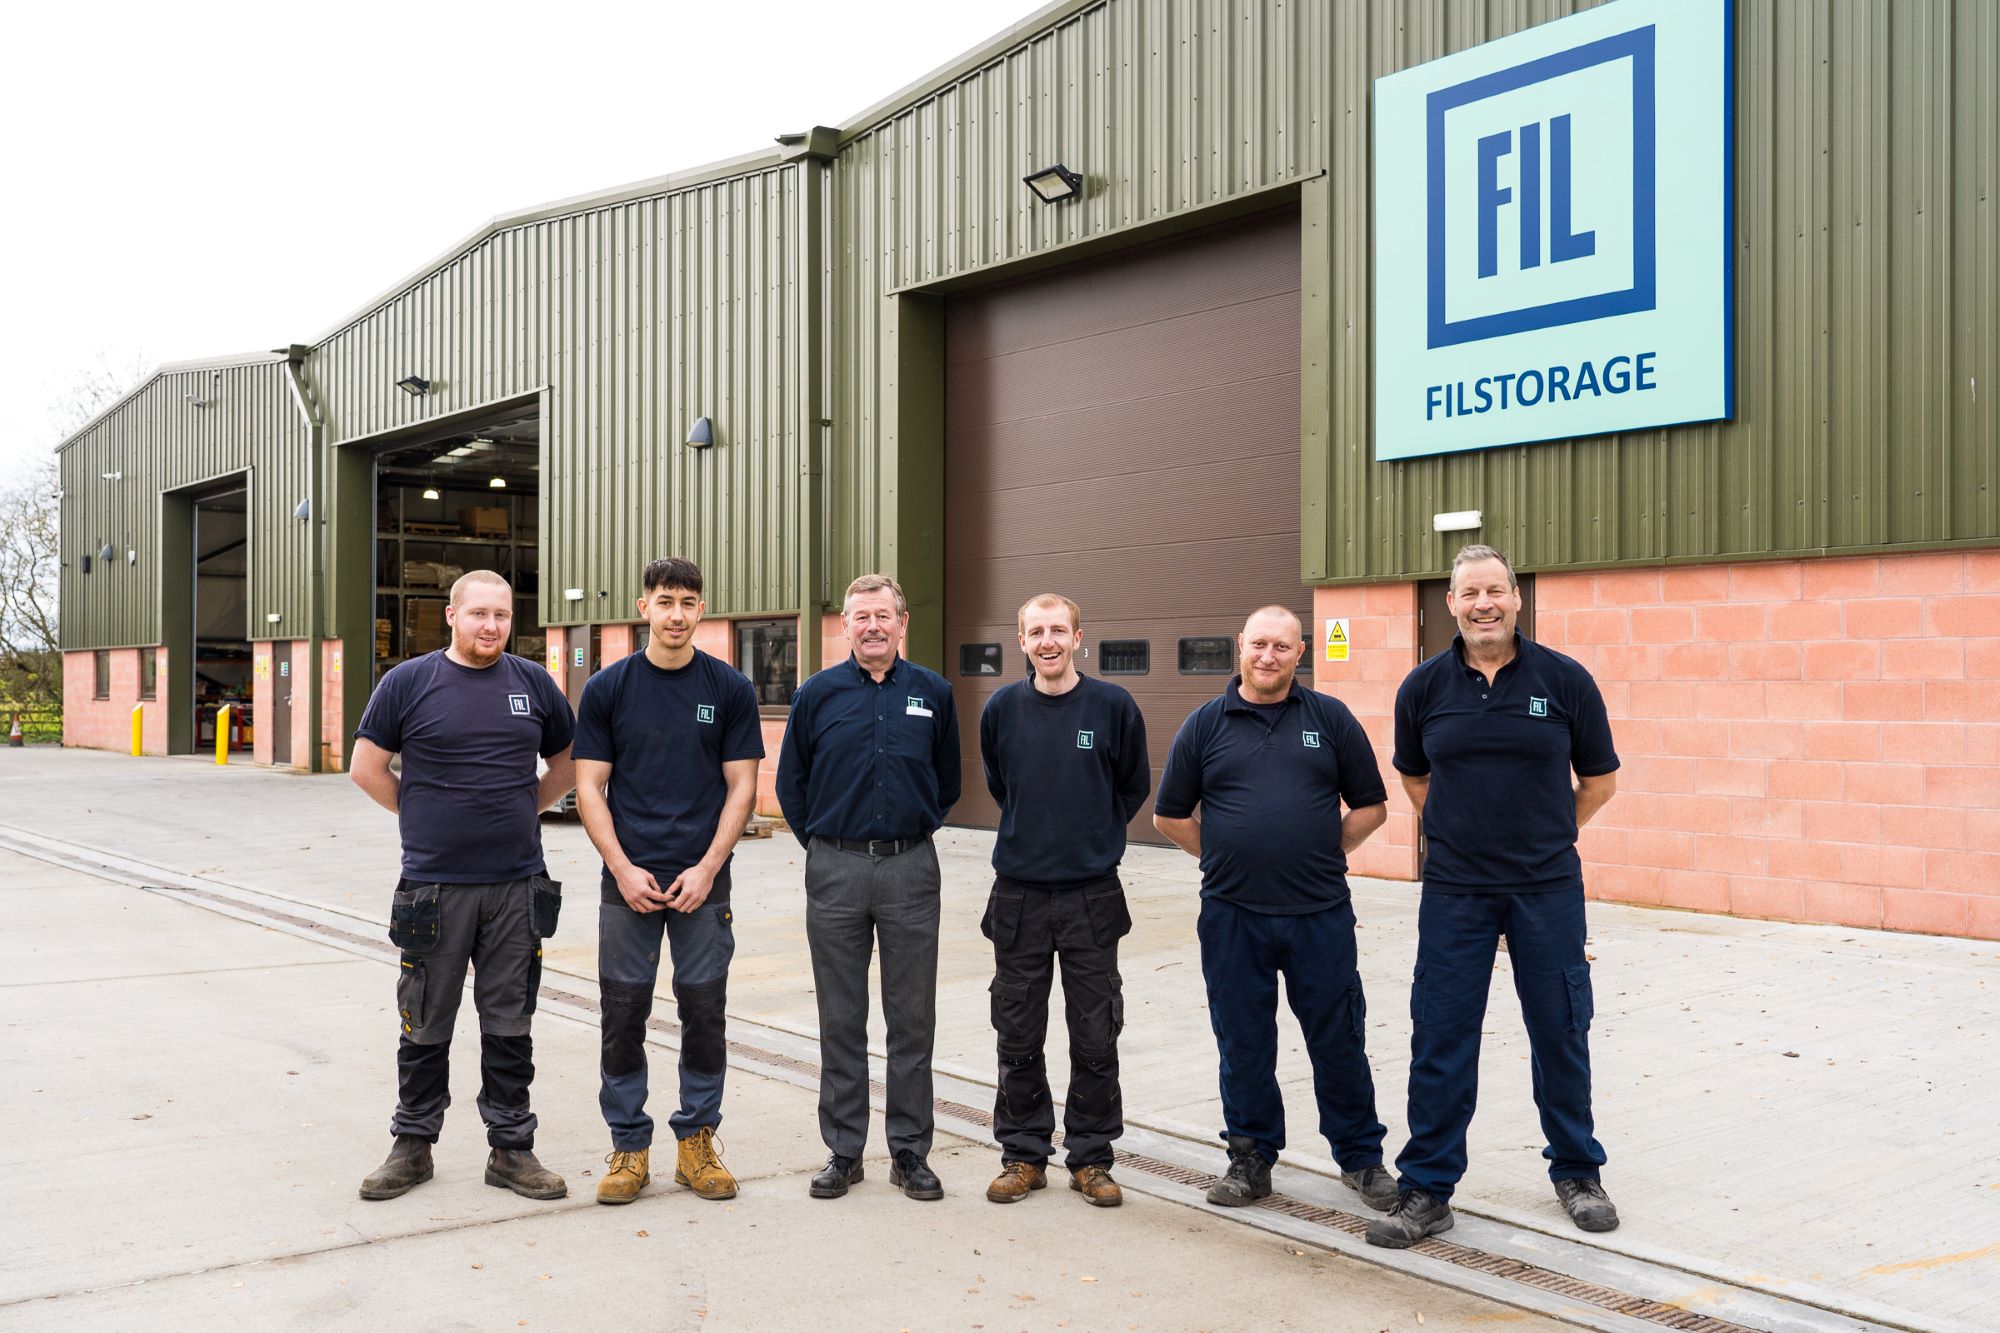 Filstorage marks 30th anniversary with new office and warehouse investment